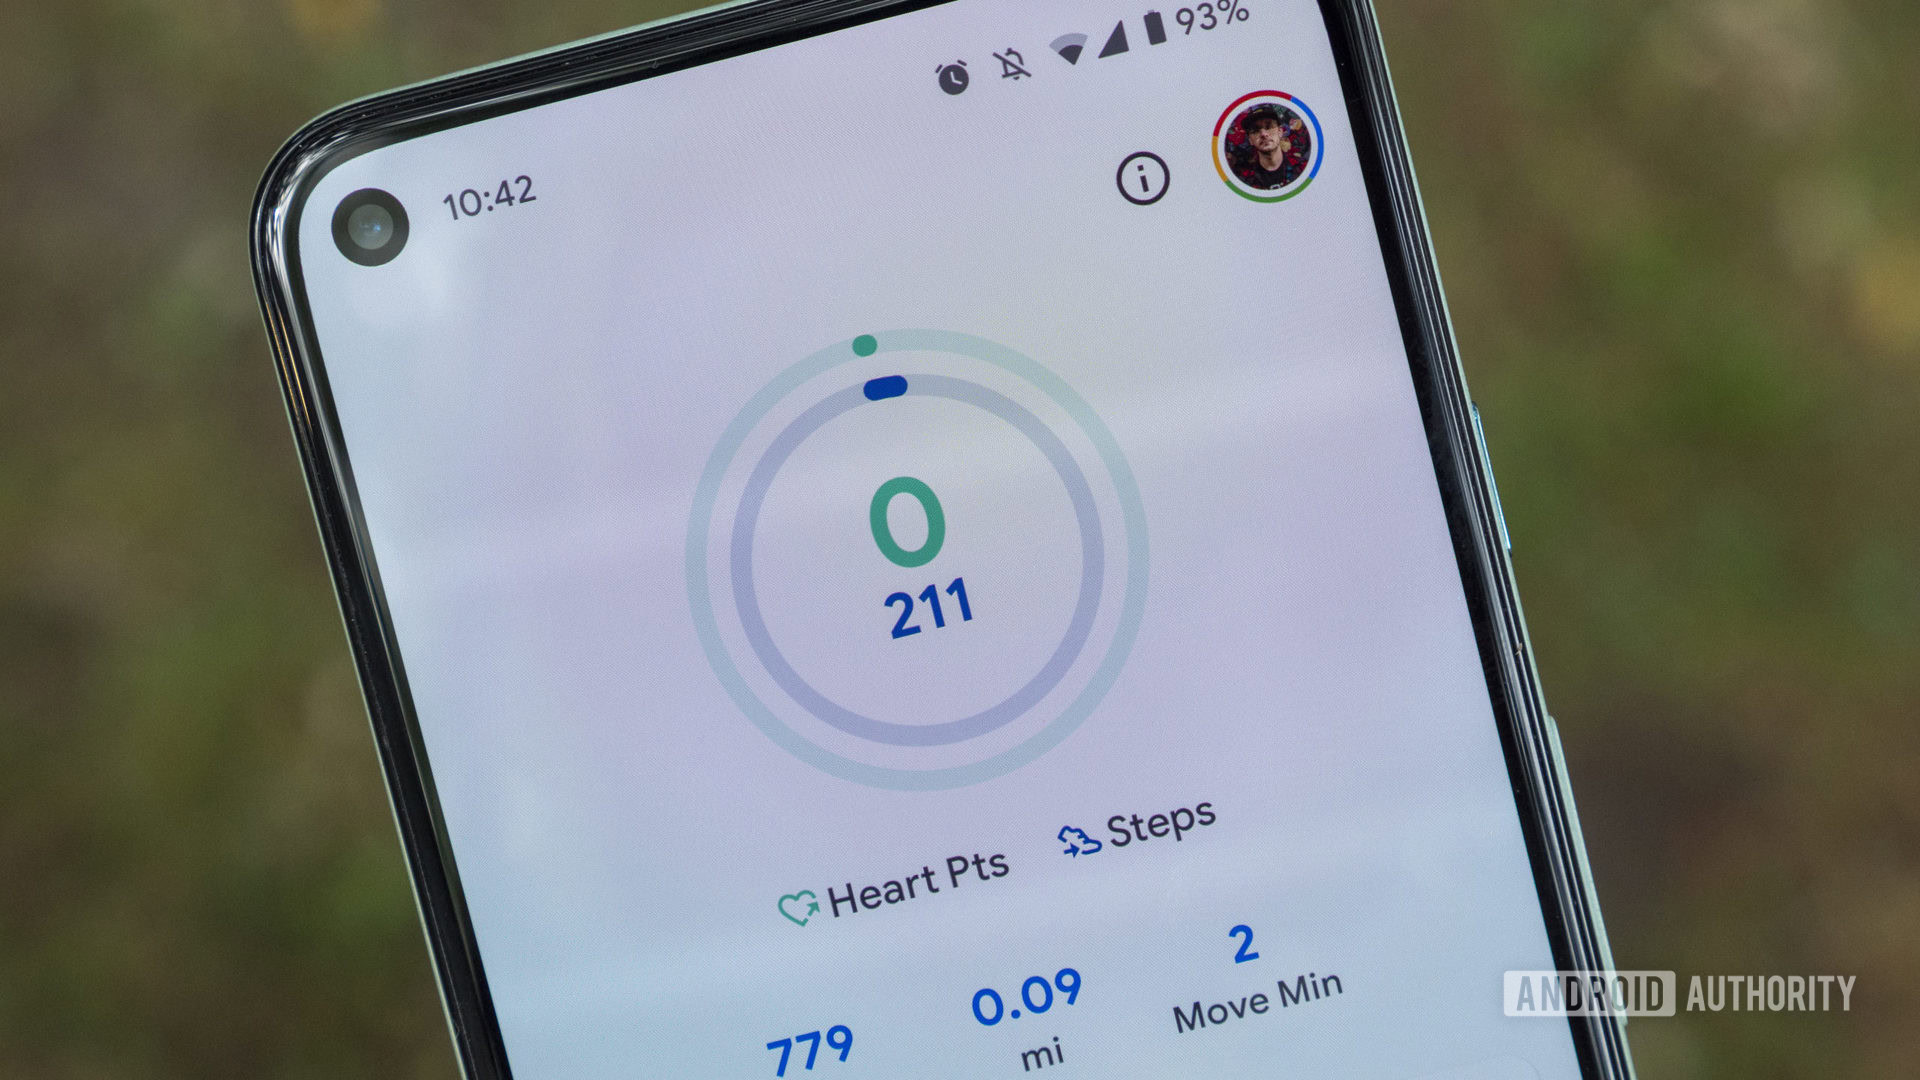 Romantik jurist Give The best pedometer apps and step counter apps for Android